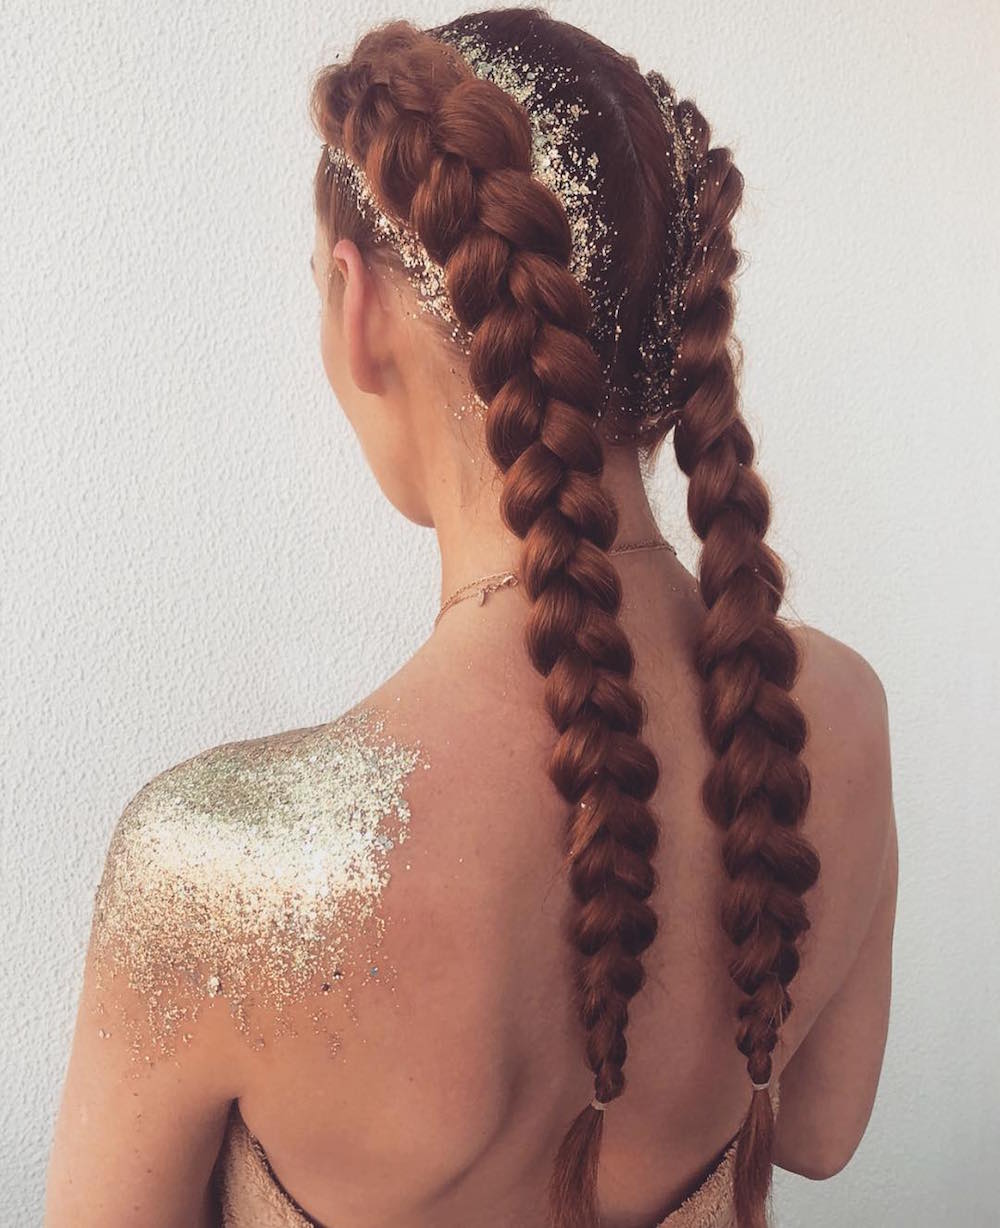 10 Creative Ways To Be Sparkingly Beautiful With Glitter Makeup  Rave hair  Hair styles Glitter hair